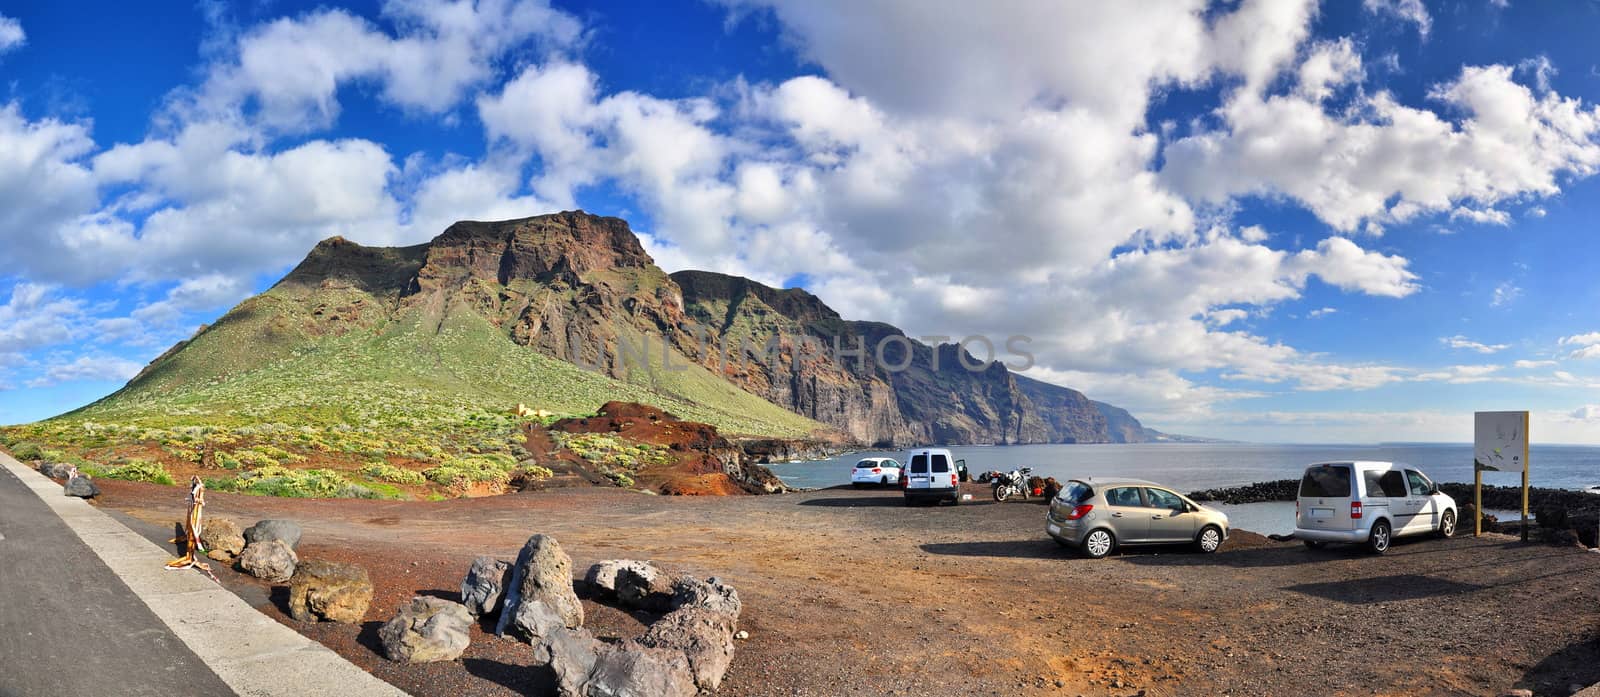 Coast with rocky mountains, Panorama in Tenerife, Canarian Islands